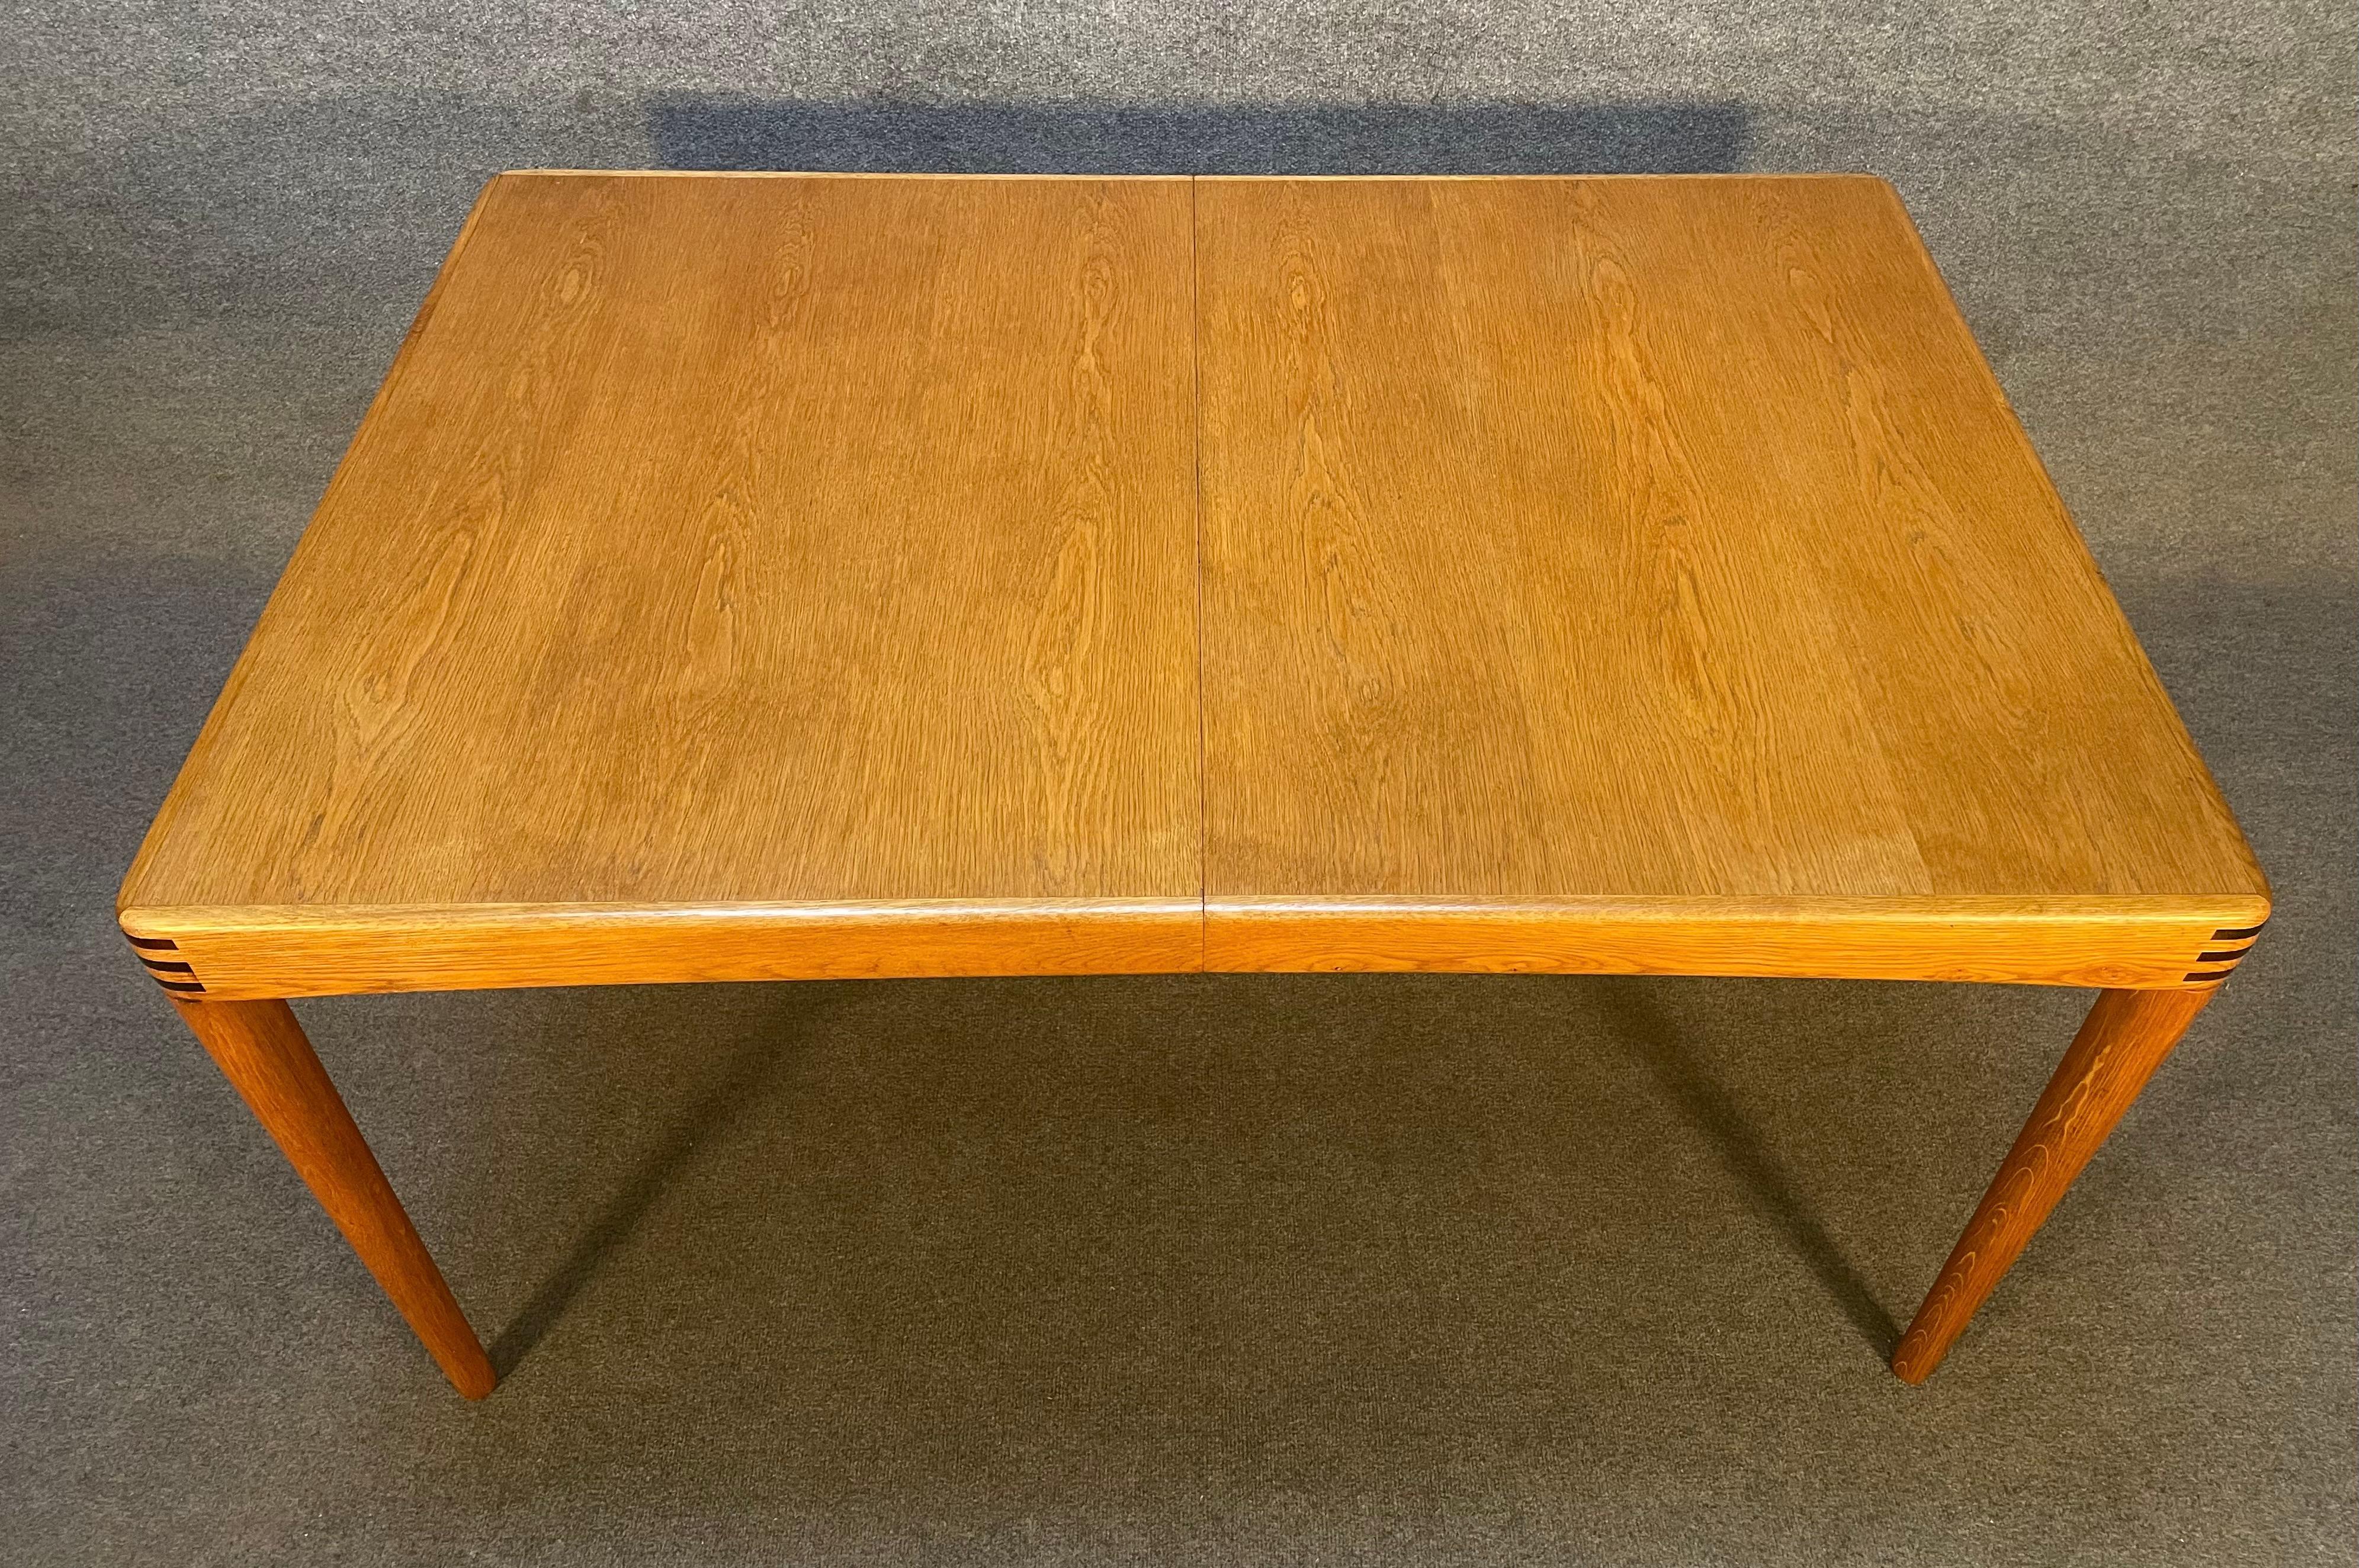 Here is a beautiful scandinavian modern dining table in oak designed by H.W. Klein and manufcatured by Bramin Mobler in Denmark in the 1960's.
This exquisite table, recently imported from Europe to California before its refinishing, features a